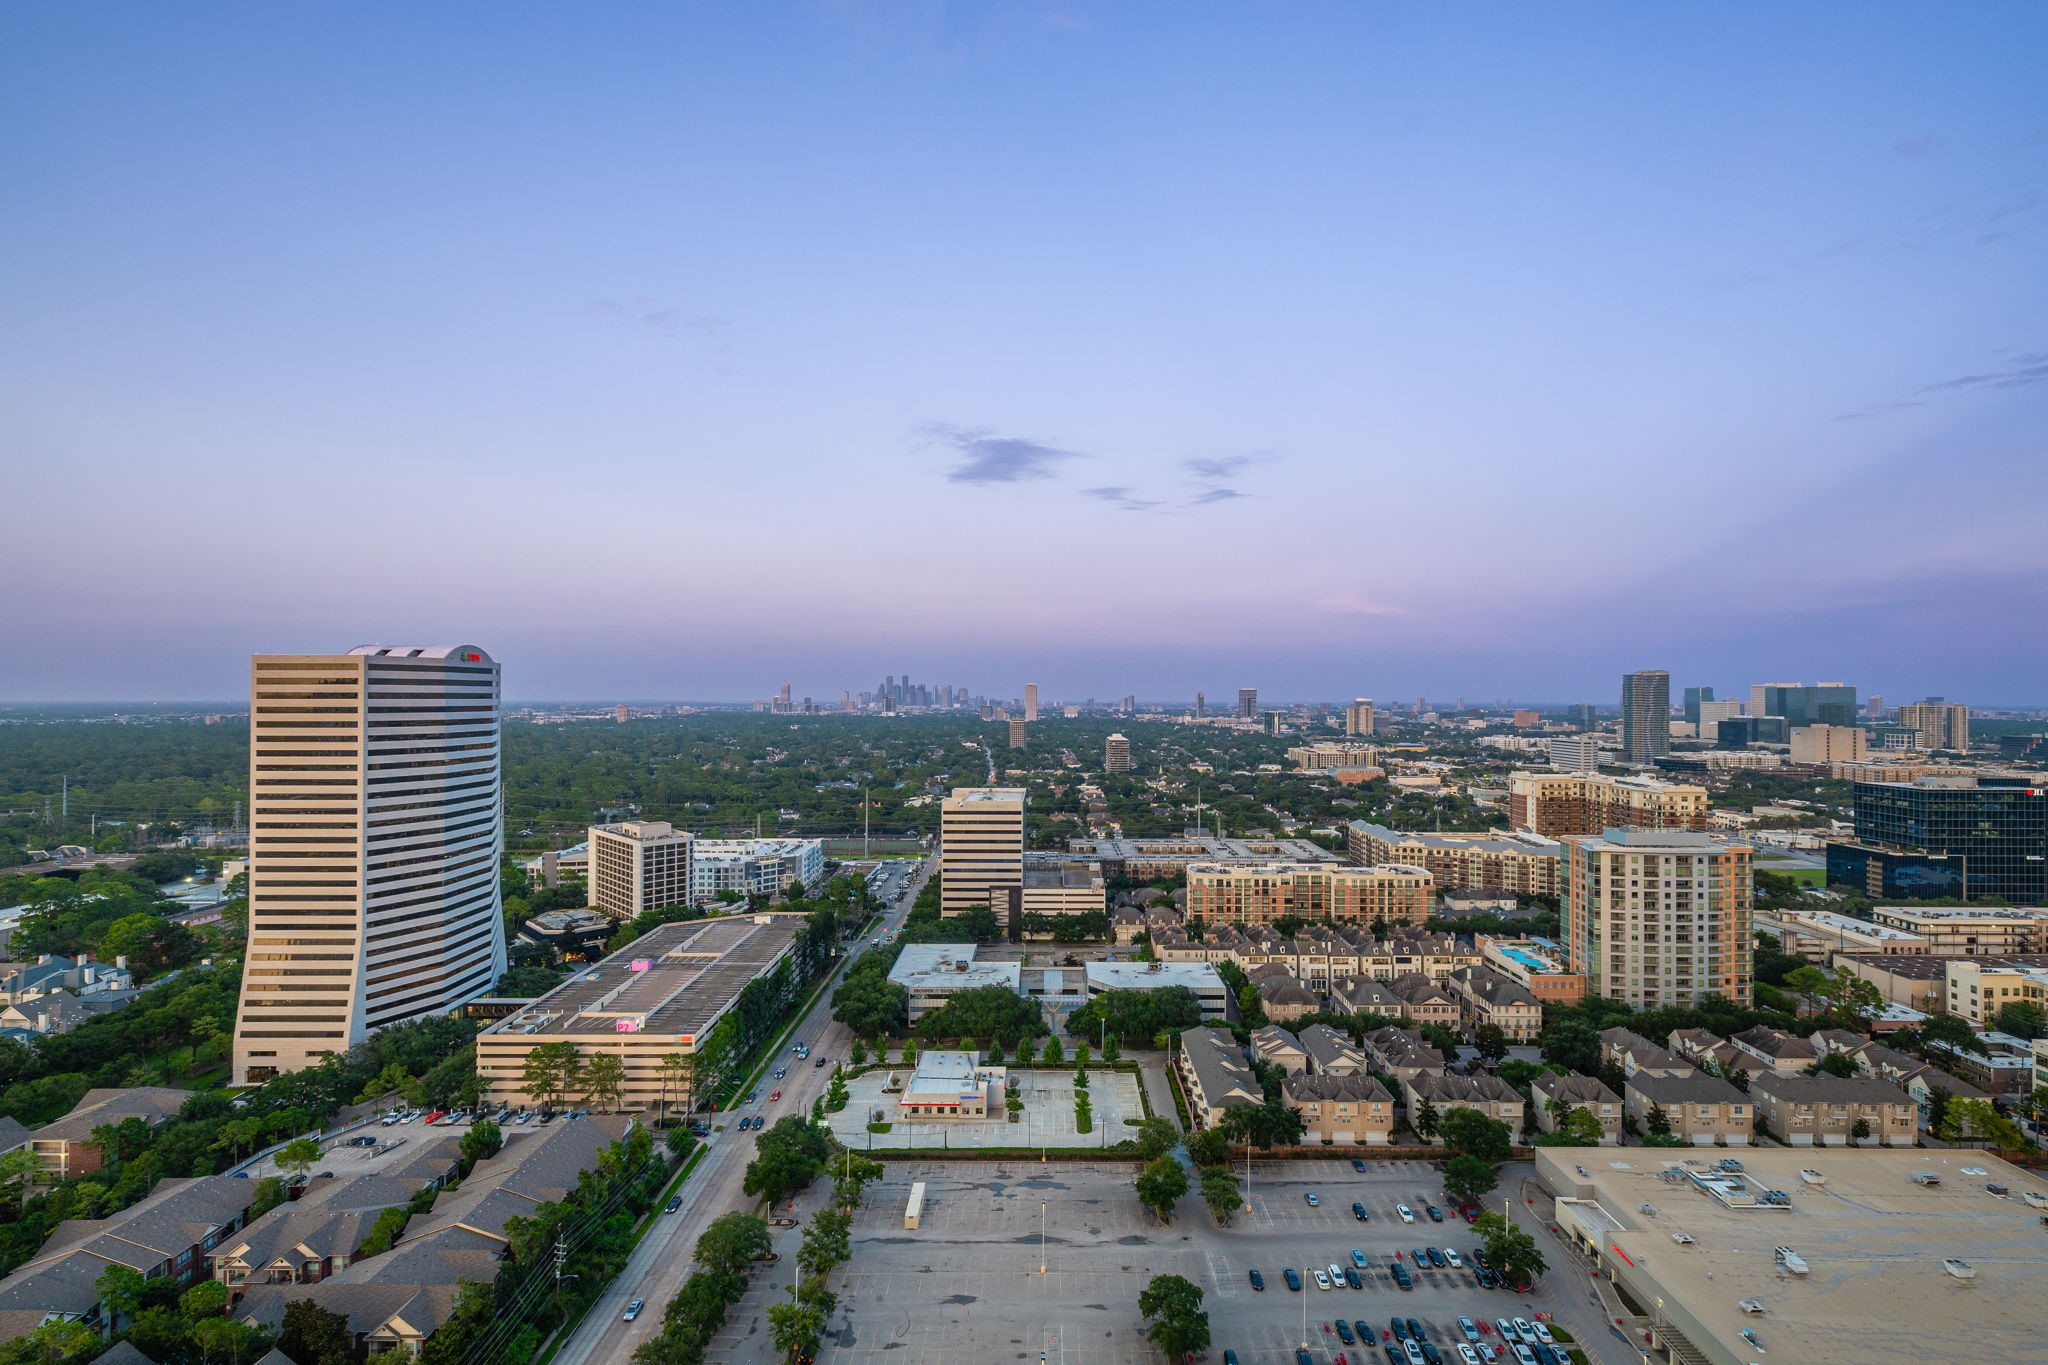 The Houston views stretch far and wide, showcasing the city's bustling streets, cultural districts, and green spaces